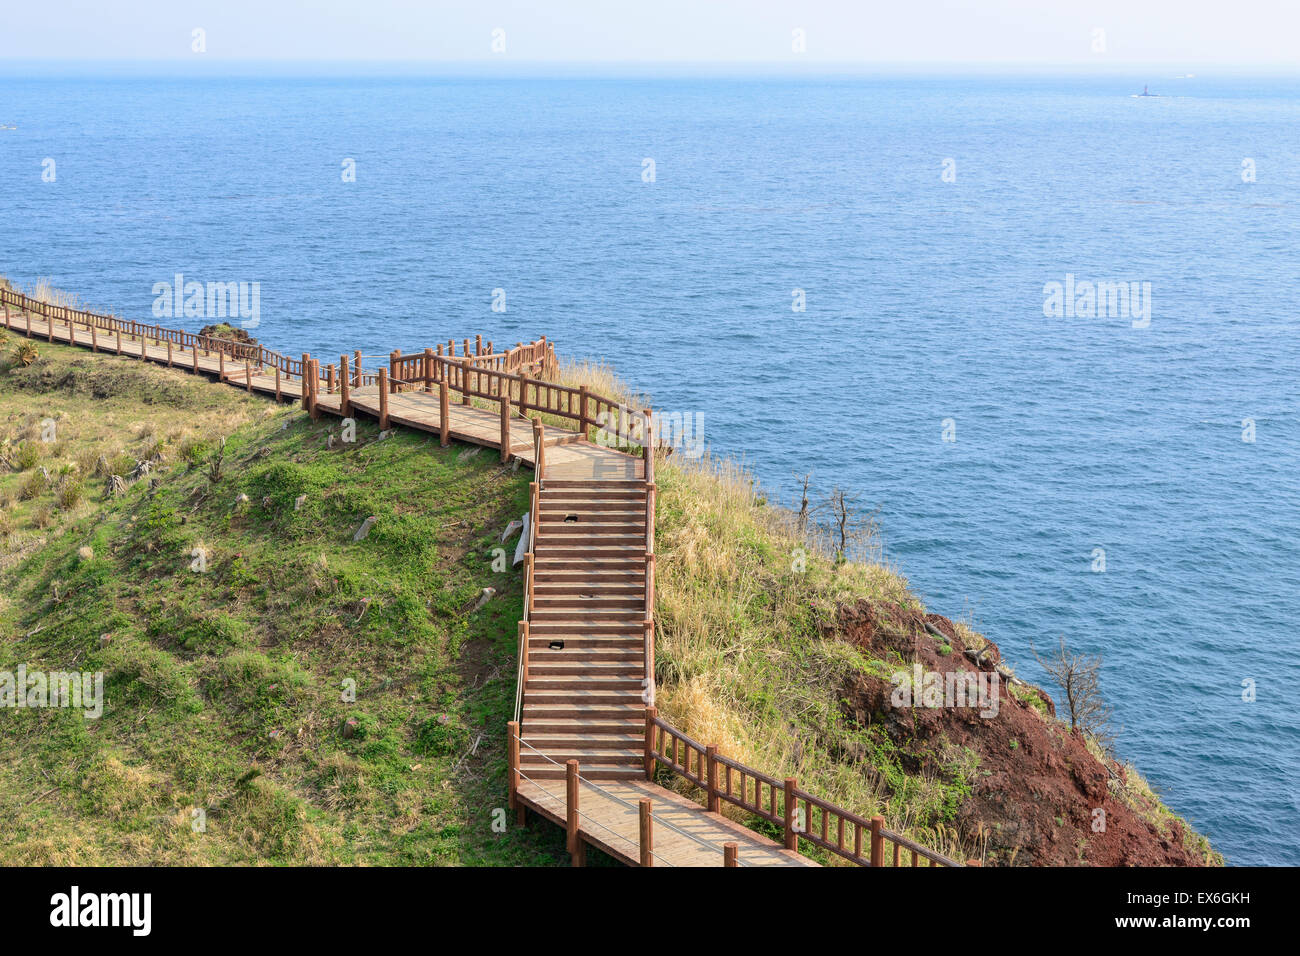 View of Olle walking path No. 10 Course in Songaksan in jeju island, Korea. Olle is famous trekking courses created along coast Stock Photo